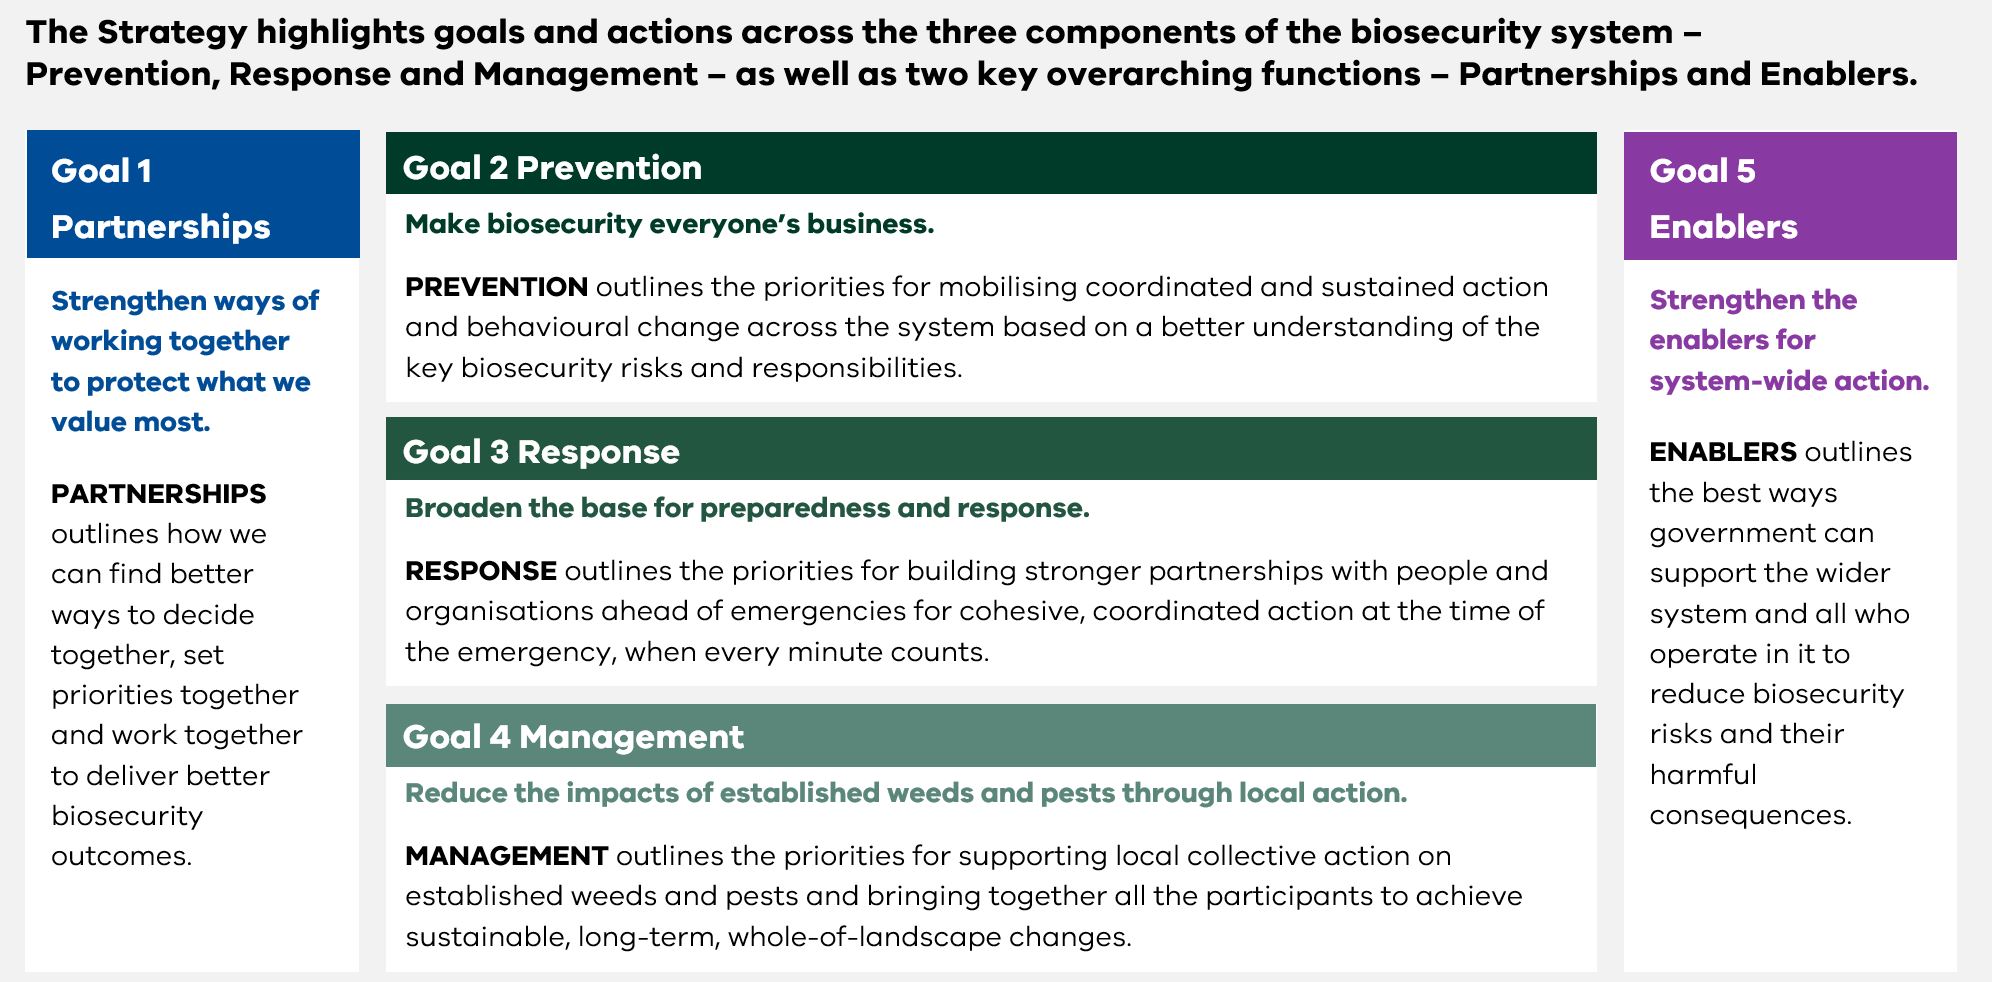 A graphic of the 5 strategic goals for the strategy. This information is available in written form on pages 5 and 6 of the strategy.